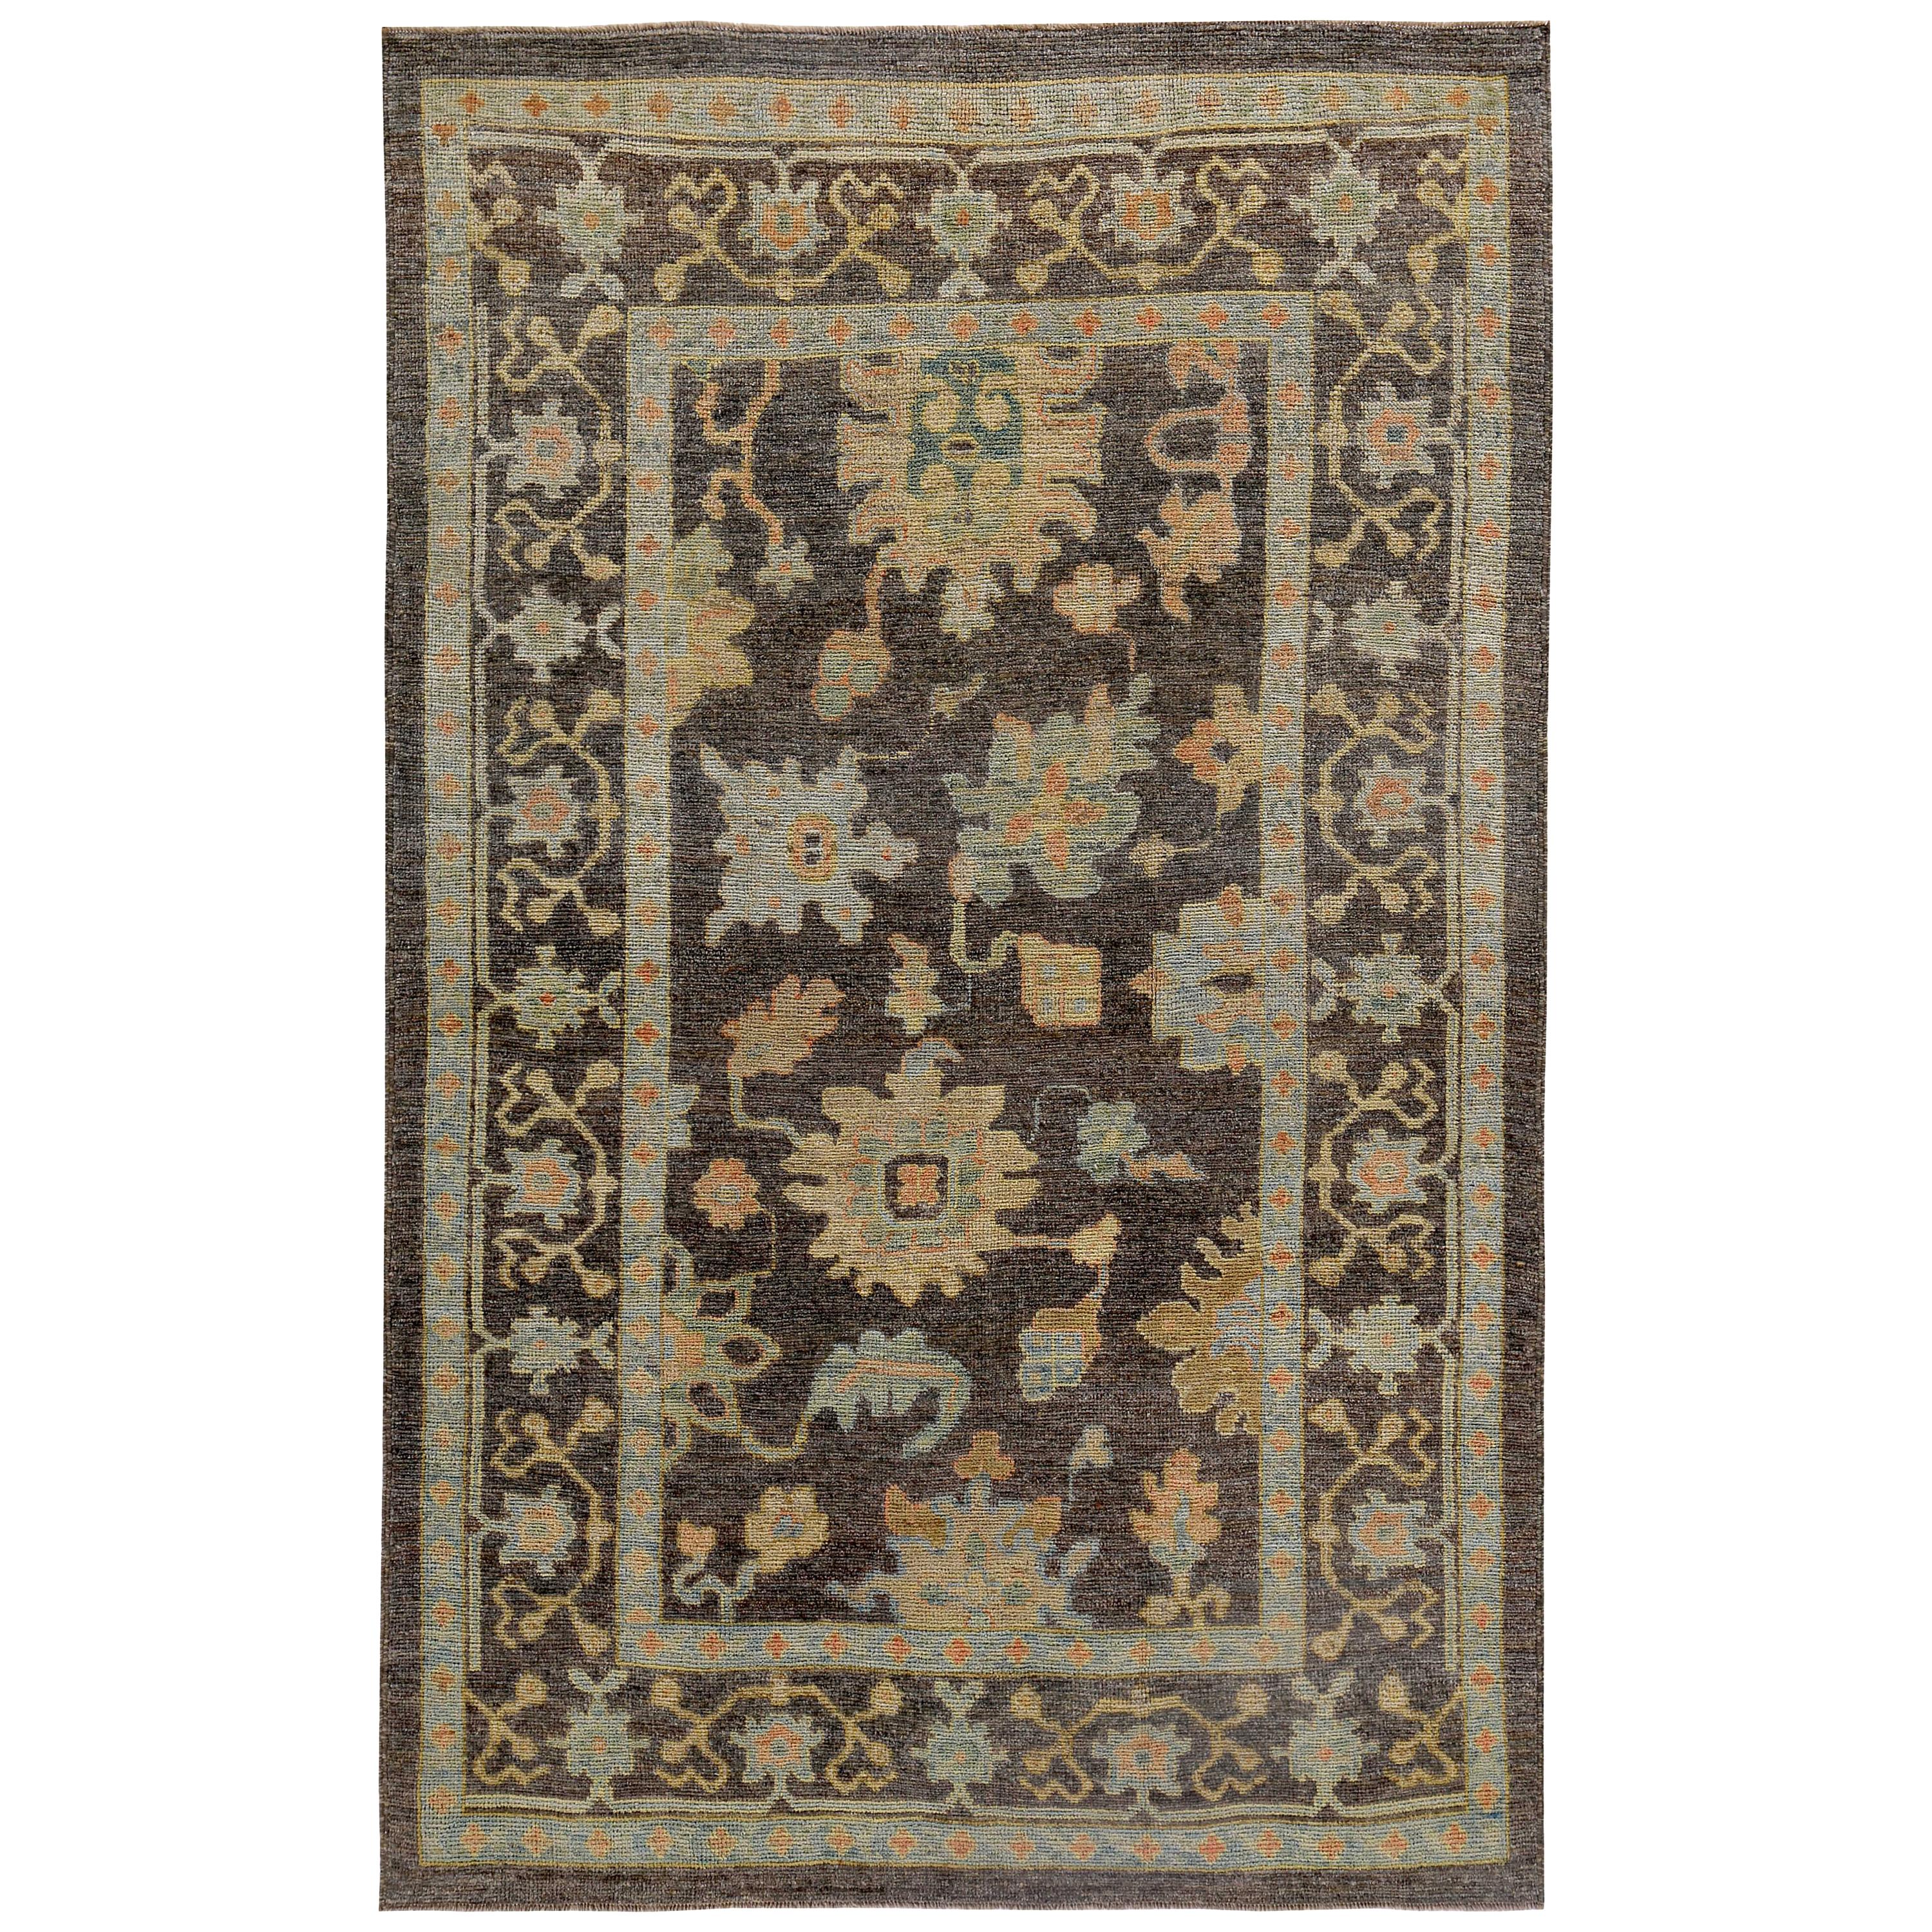 Turkish Oushak Rug with Blue and Beige Flower Patterns on Brown Field